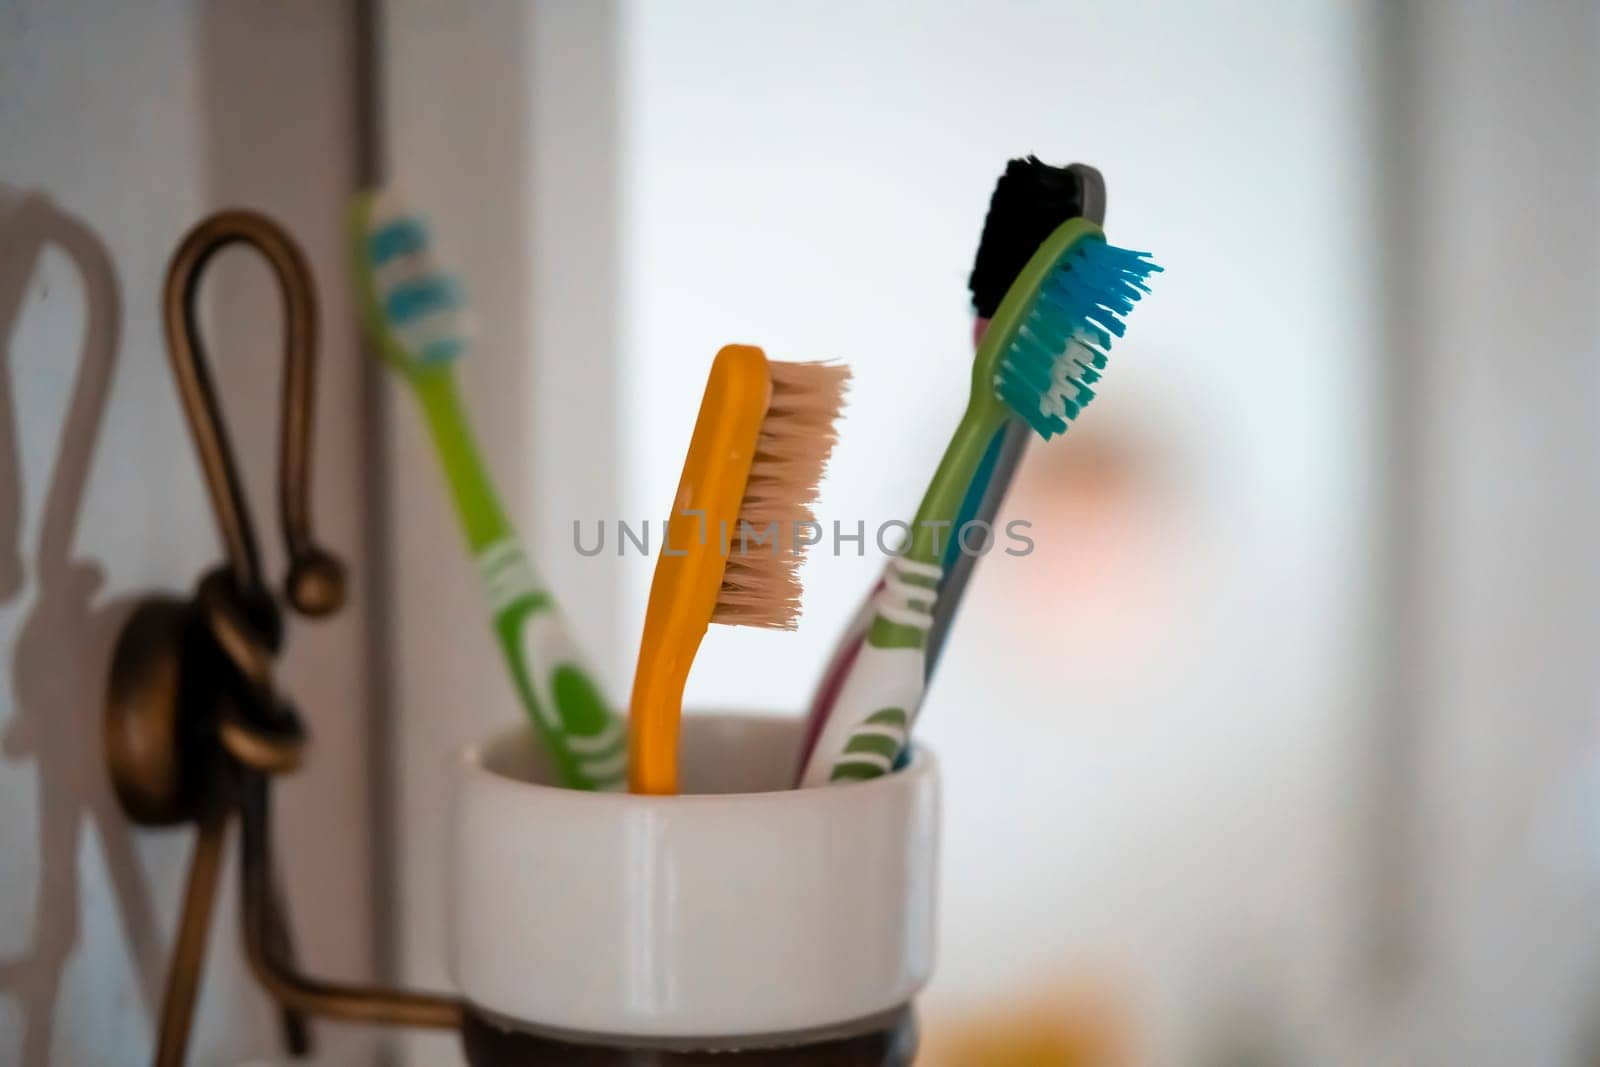 Toothbrushes for personal hygiene, teeth and gums health care. by africapink